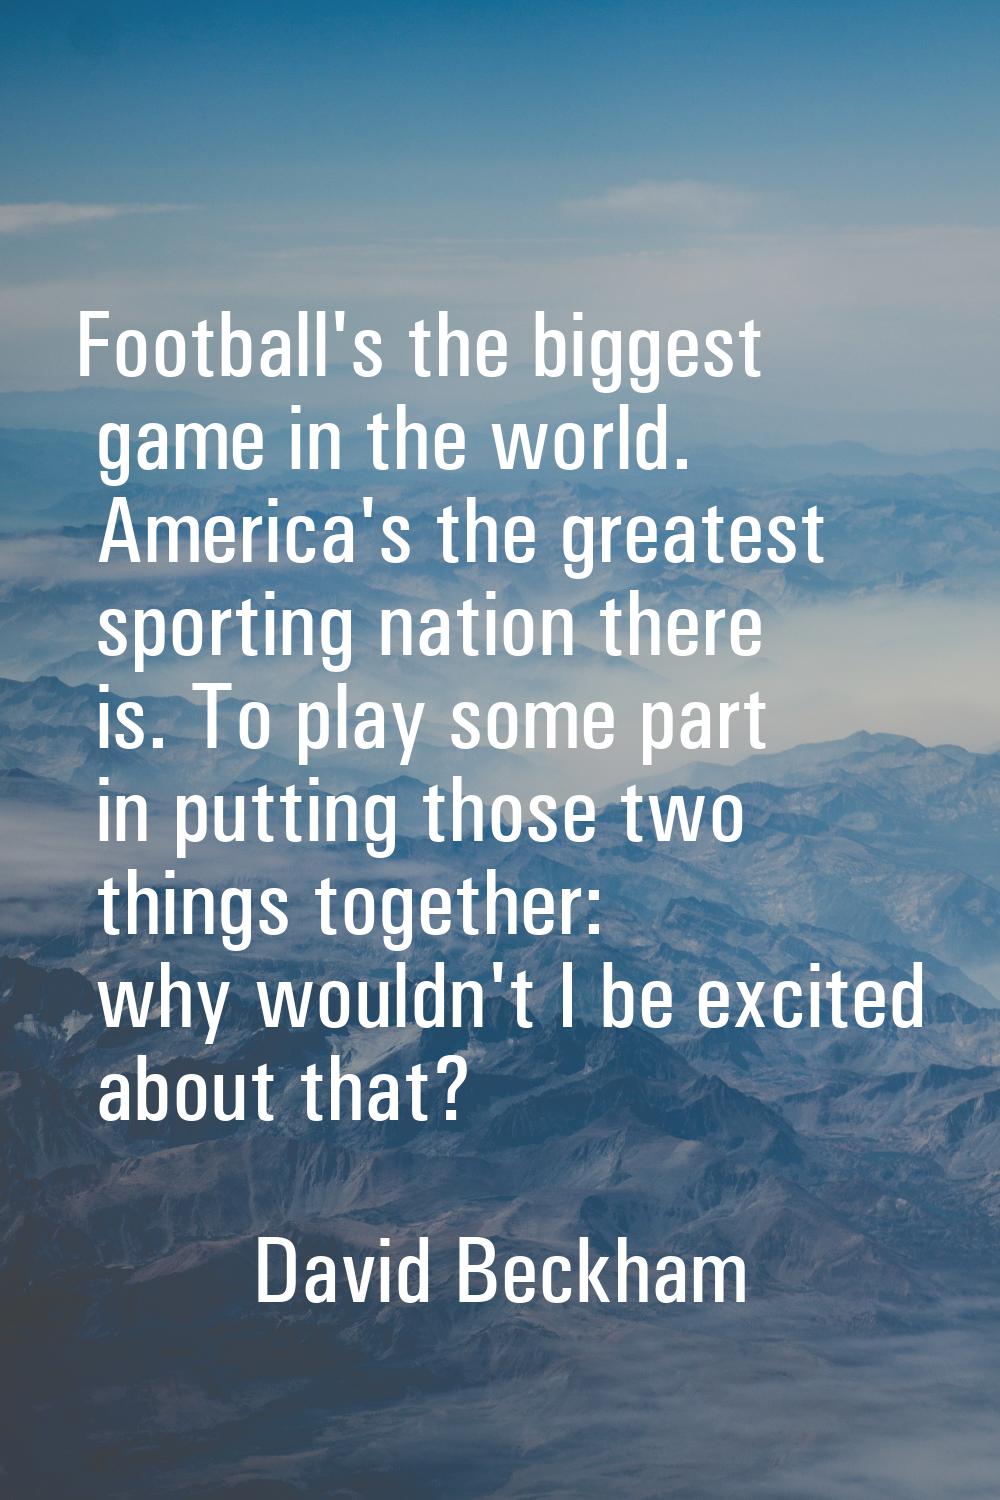 Football's the biggest game in the world. America's the greatest sporting nation there is. To play 